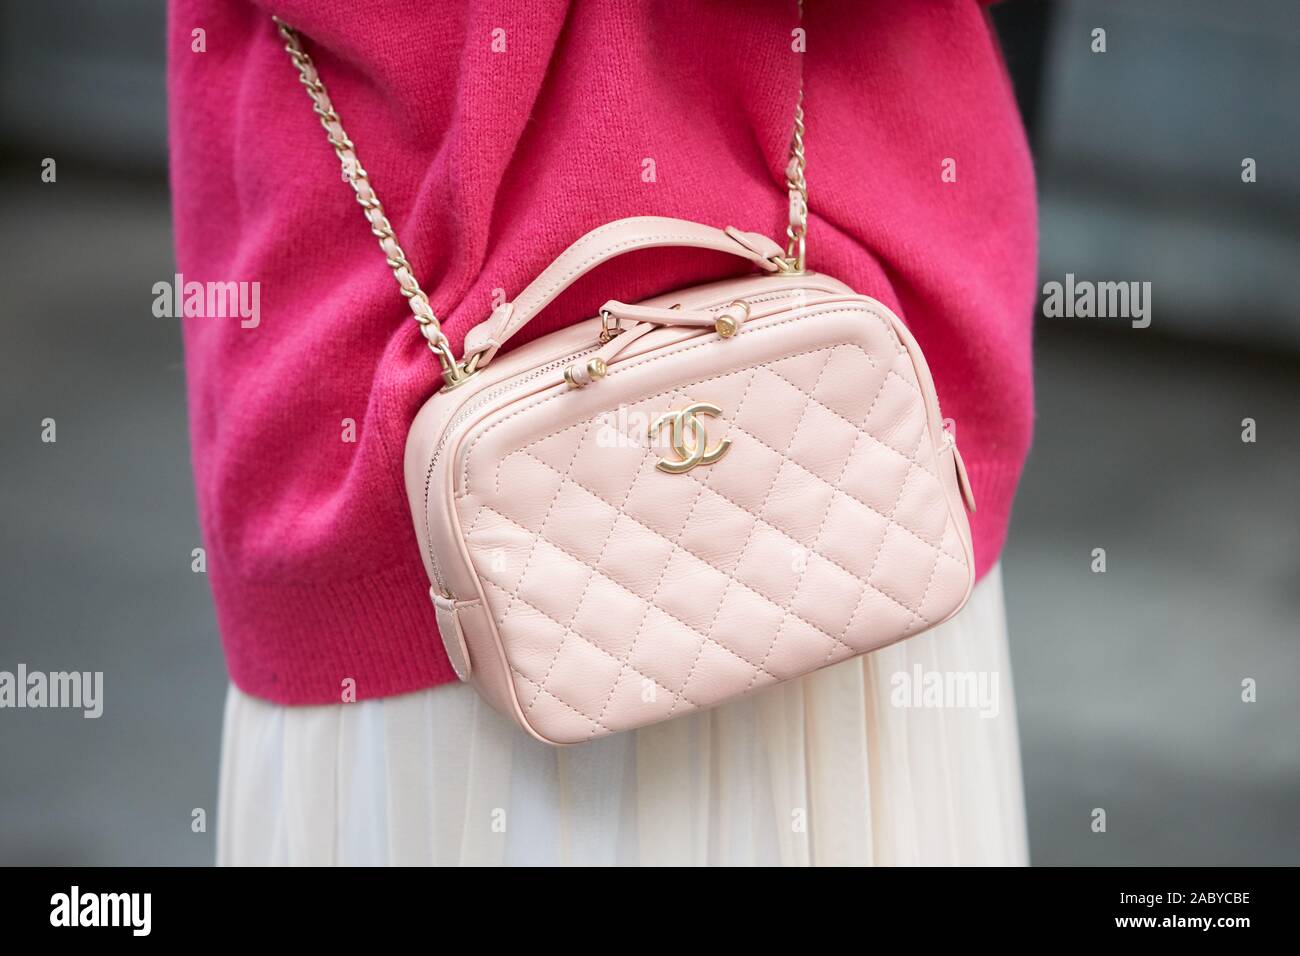 Woman with Pink Chanel Leather Bag before Jil Sander Fashion Show